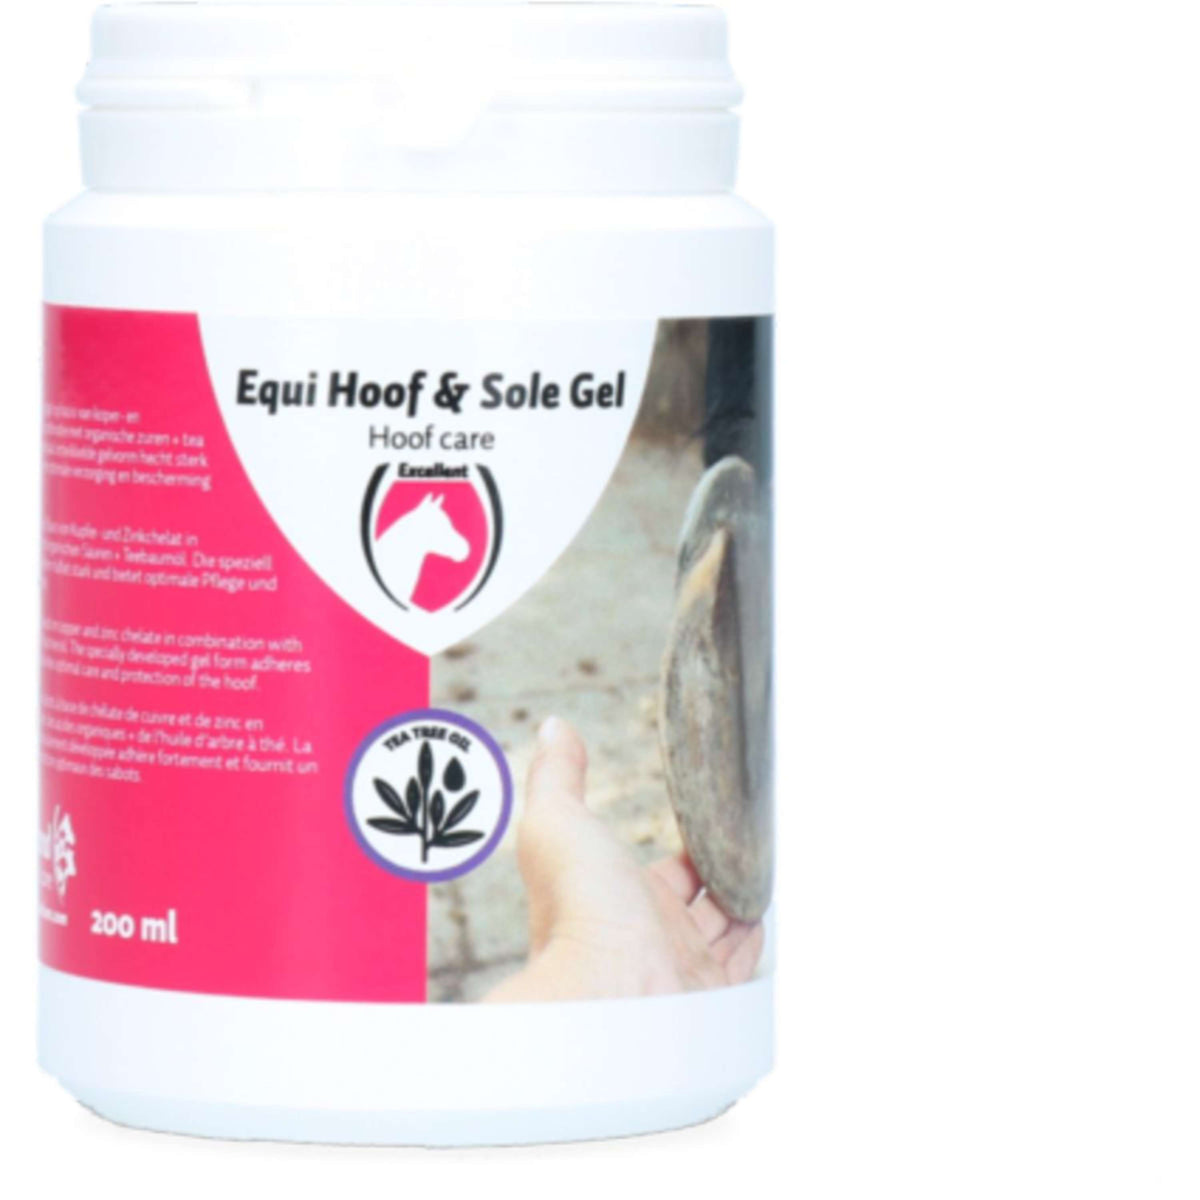 Excellent Hoof and Sole Gel